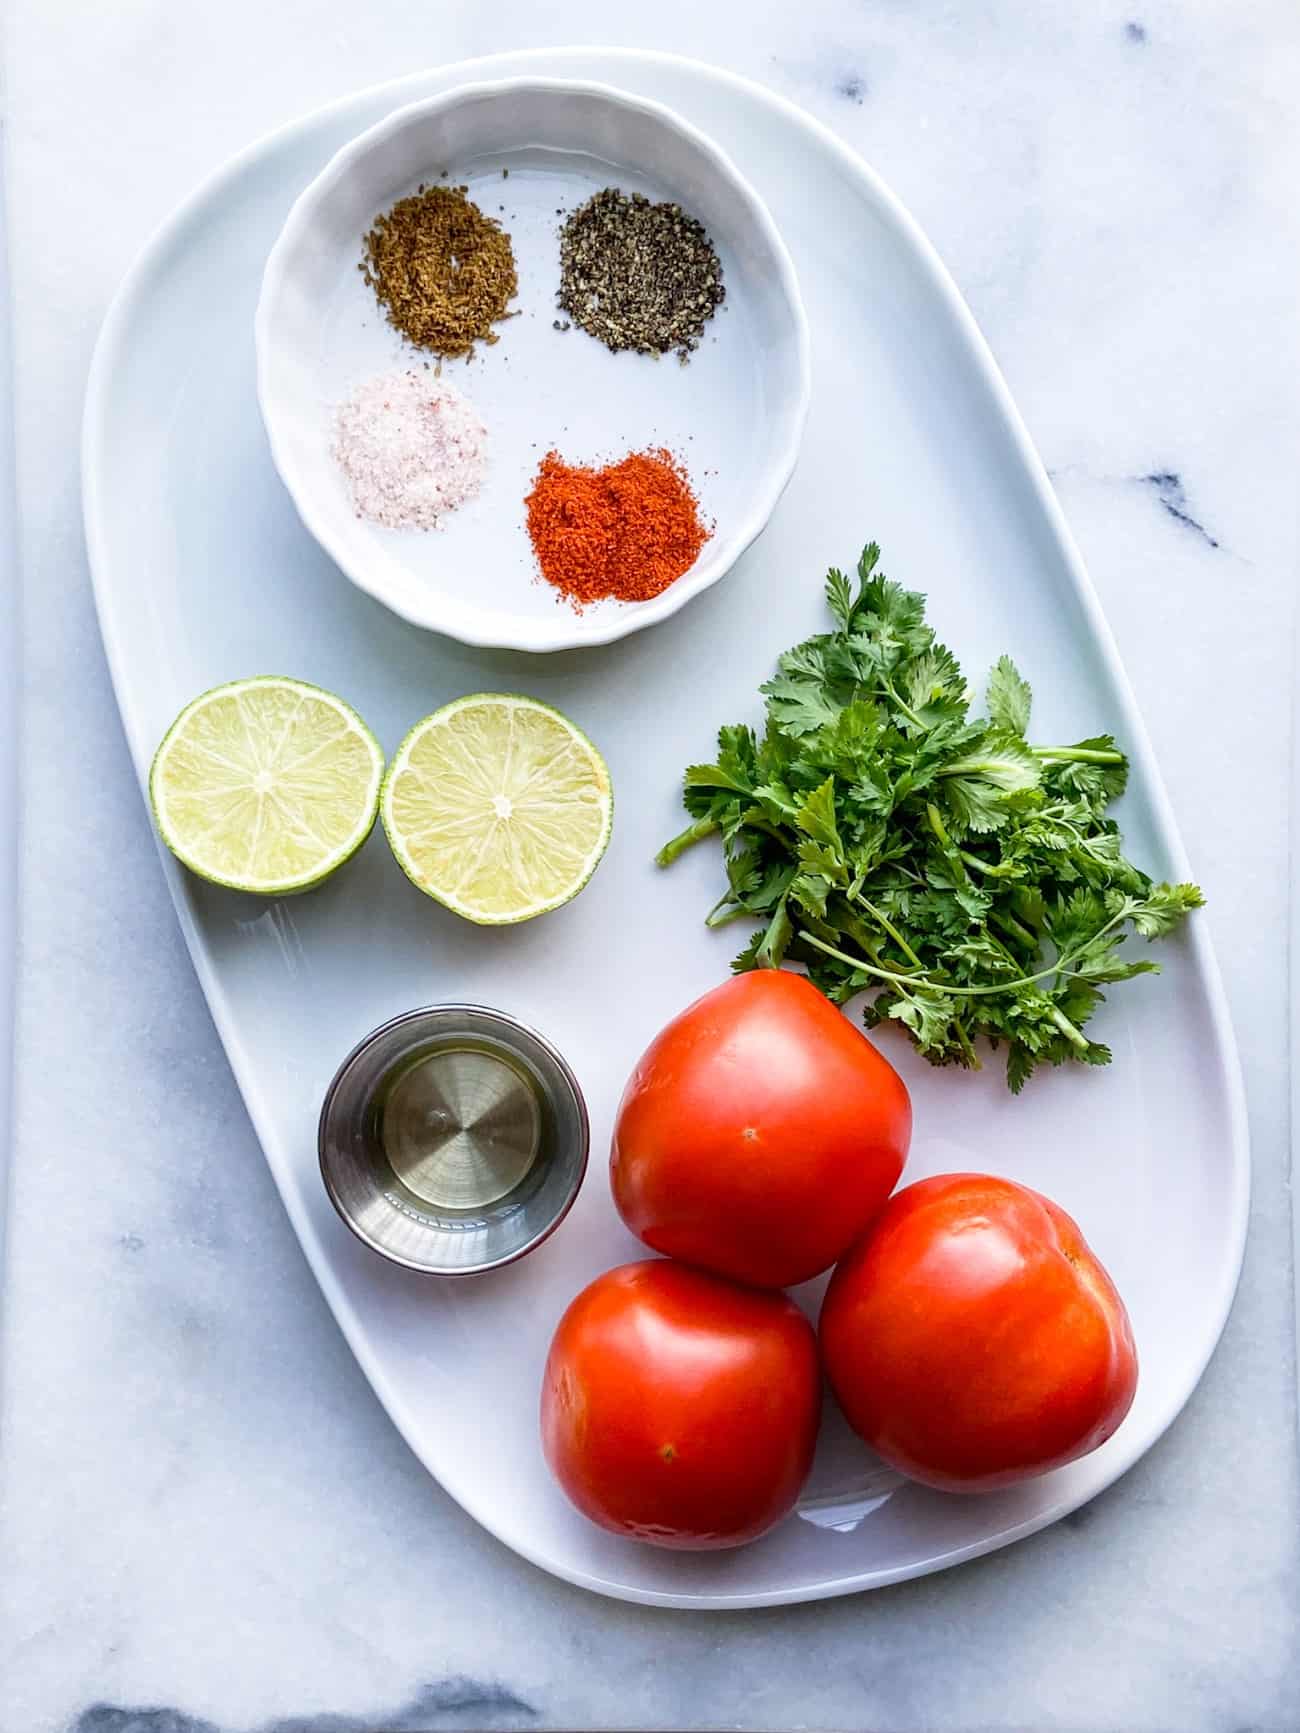 Red tomato, green lime and cilantro on a plate for Tomato salad.